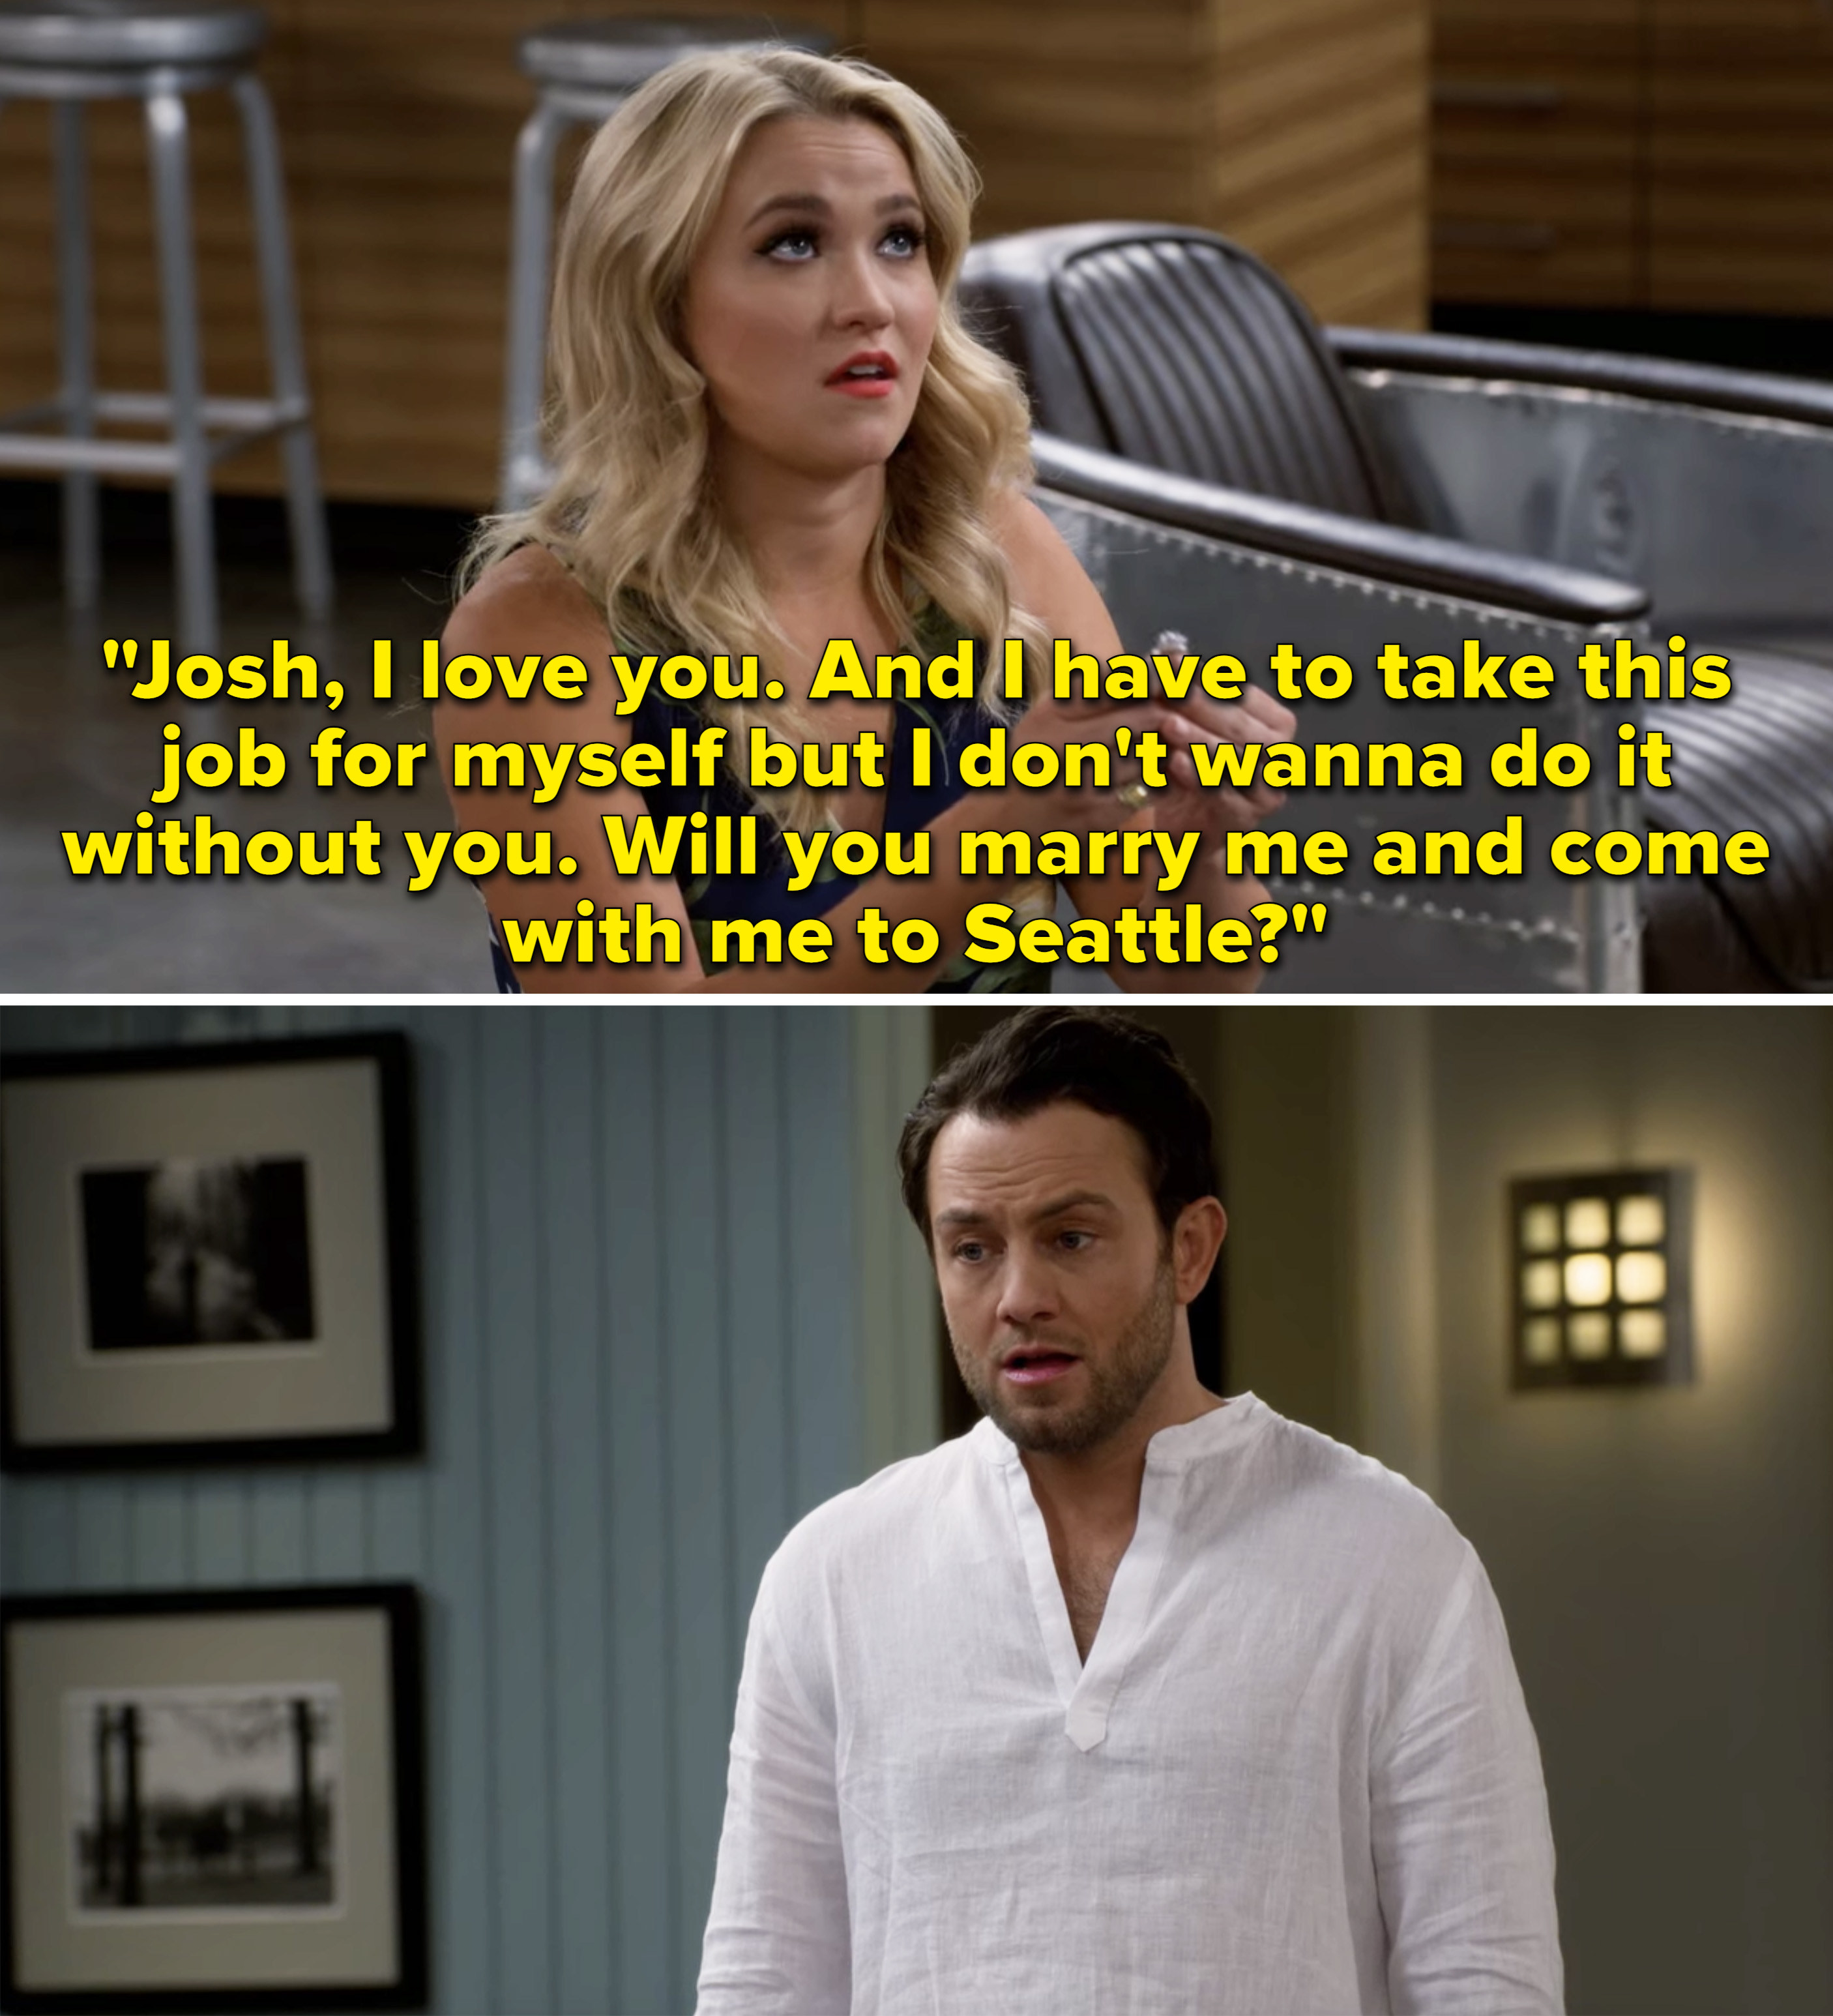 Gabi telling Josh she needs to take the job in Seattle, but she wants him to come too